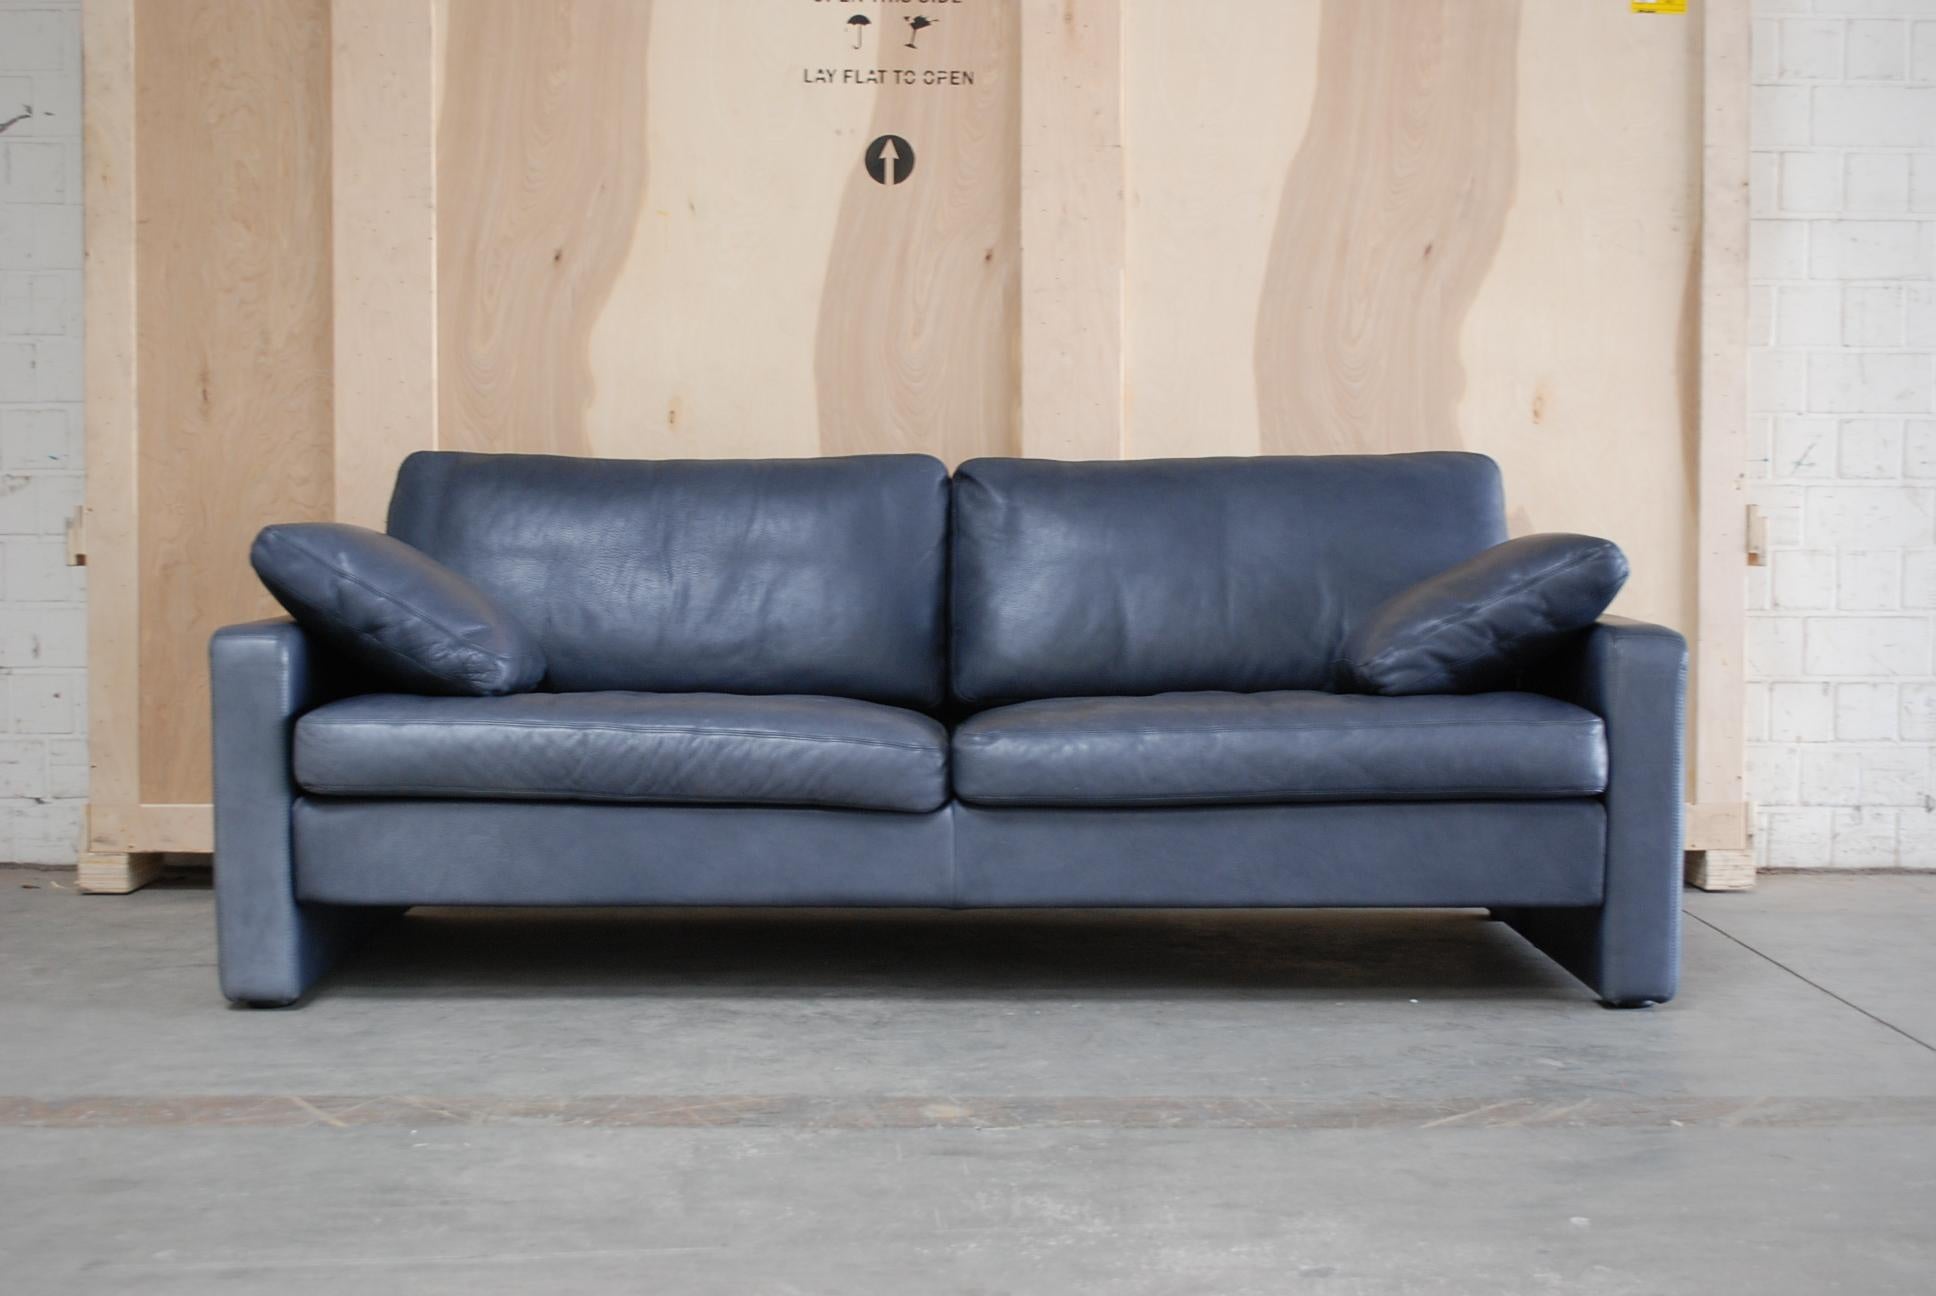 COR leather sofa model Conseta from.
Blue aniline leather. The leather has a soft touch.
Comfortable sofa with decent design.
Design by Friedrich Wilhelm Möller.
A German masterpiece of functional design.